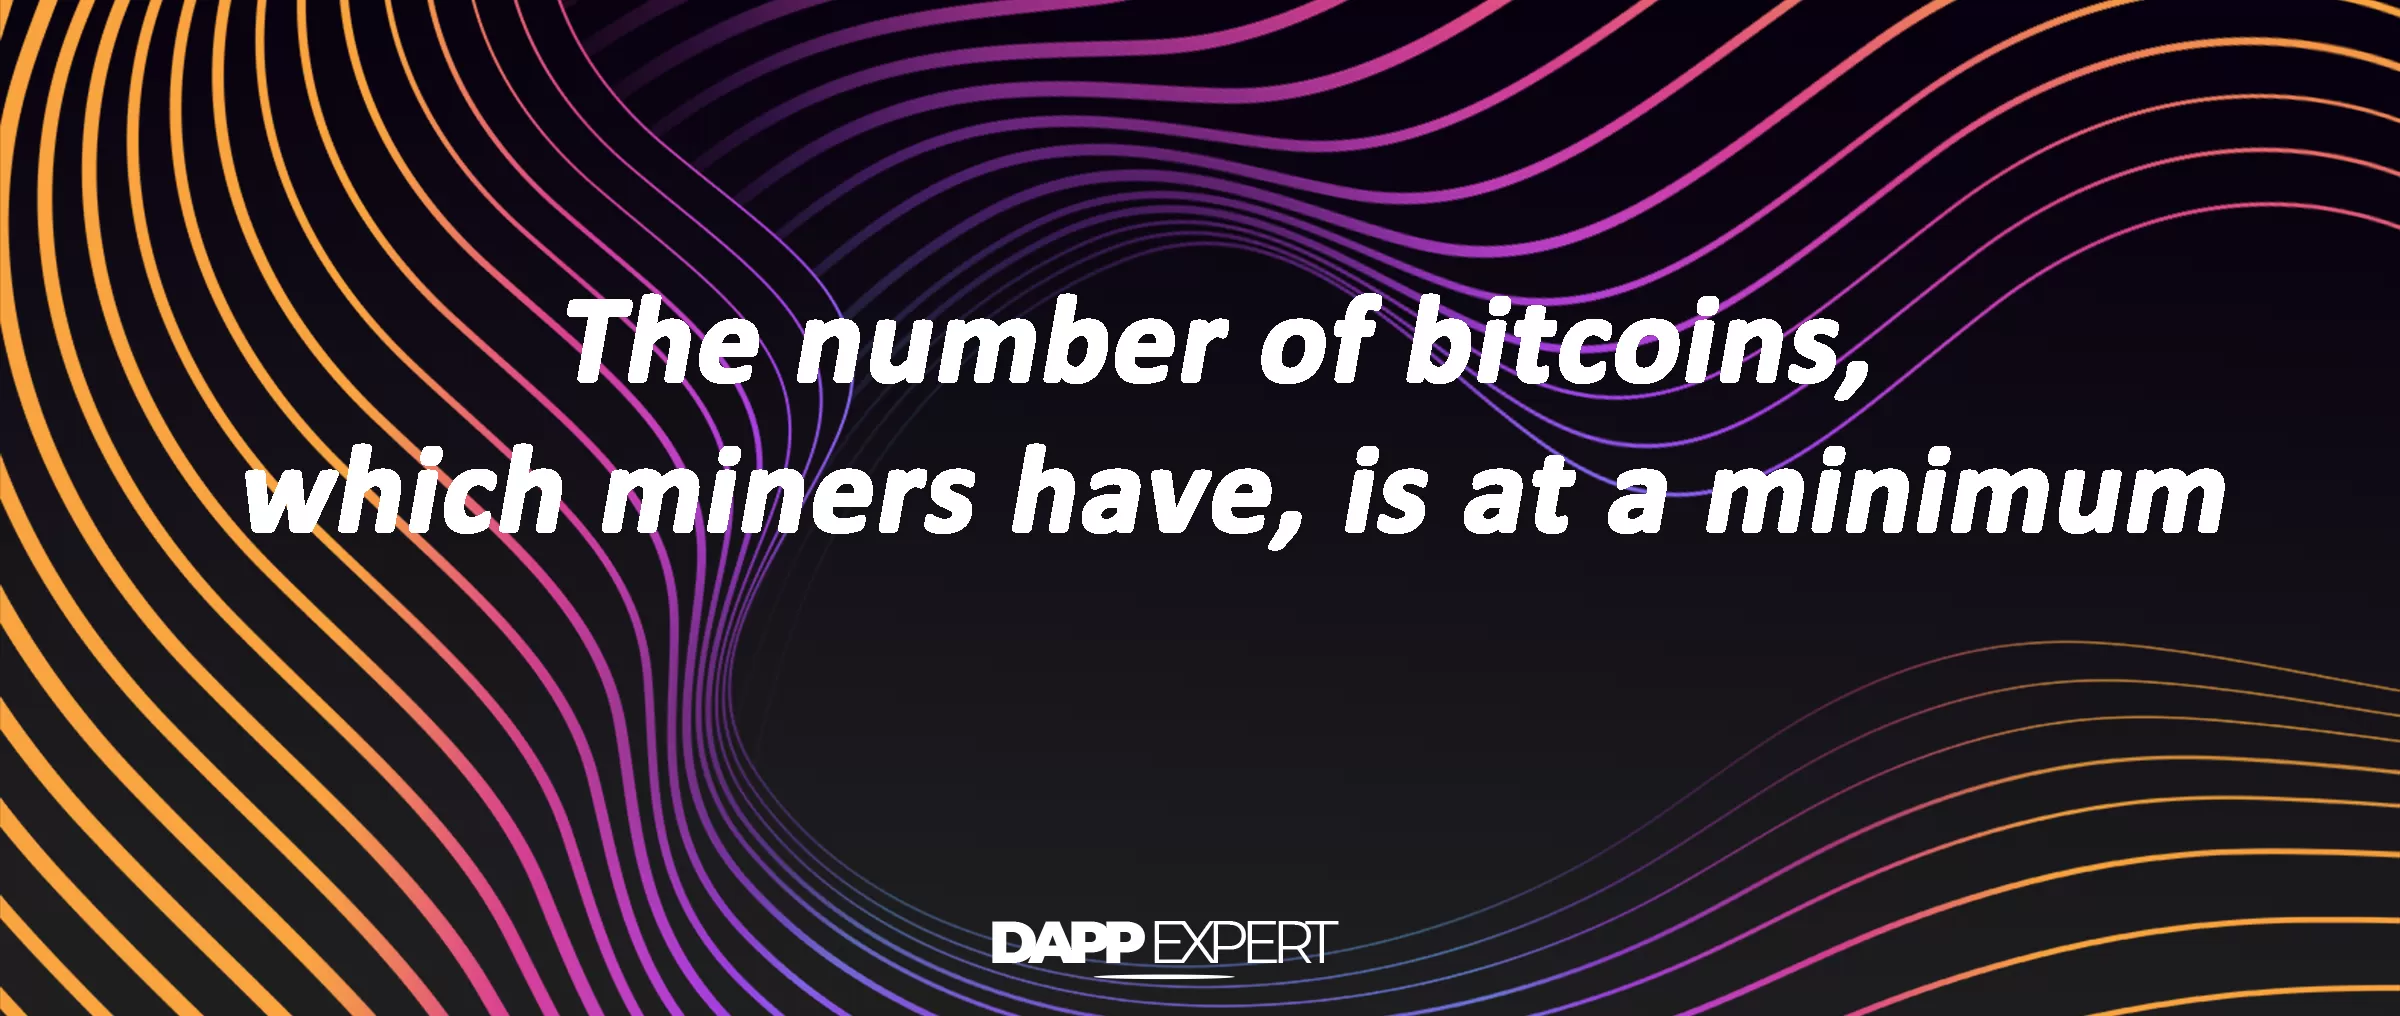 The number of bitcoins, which miners have, is at a minimum